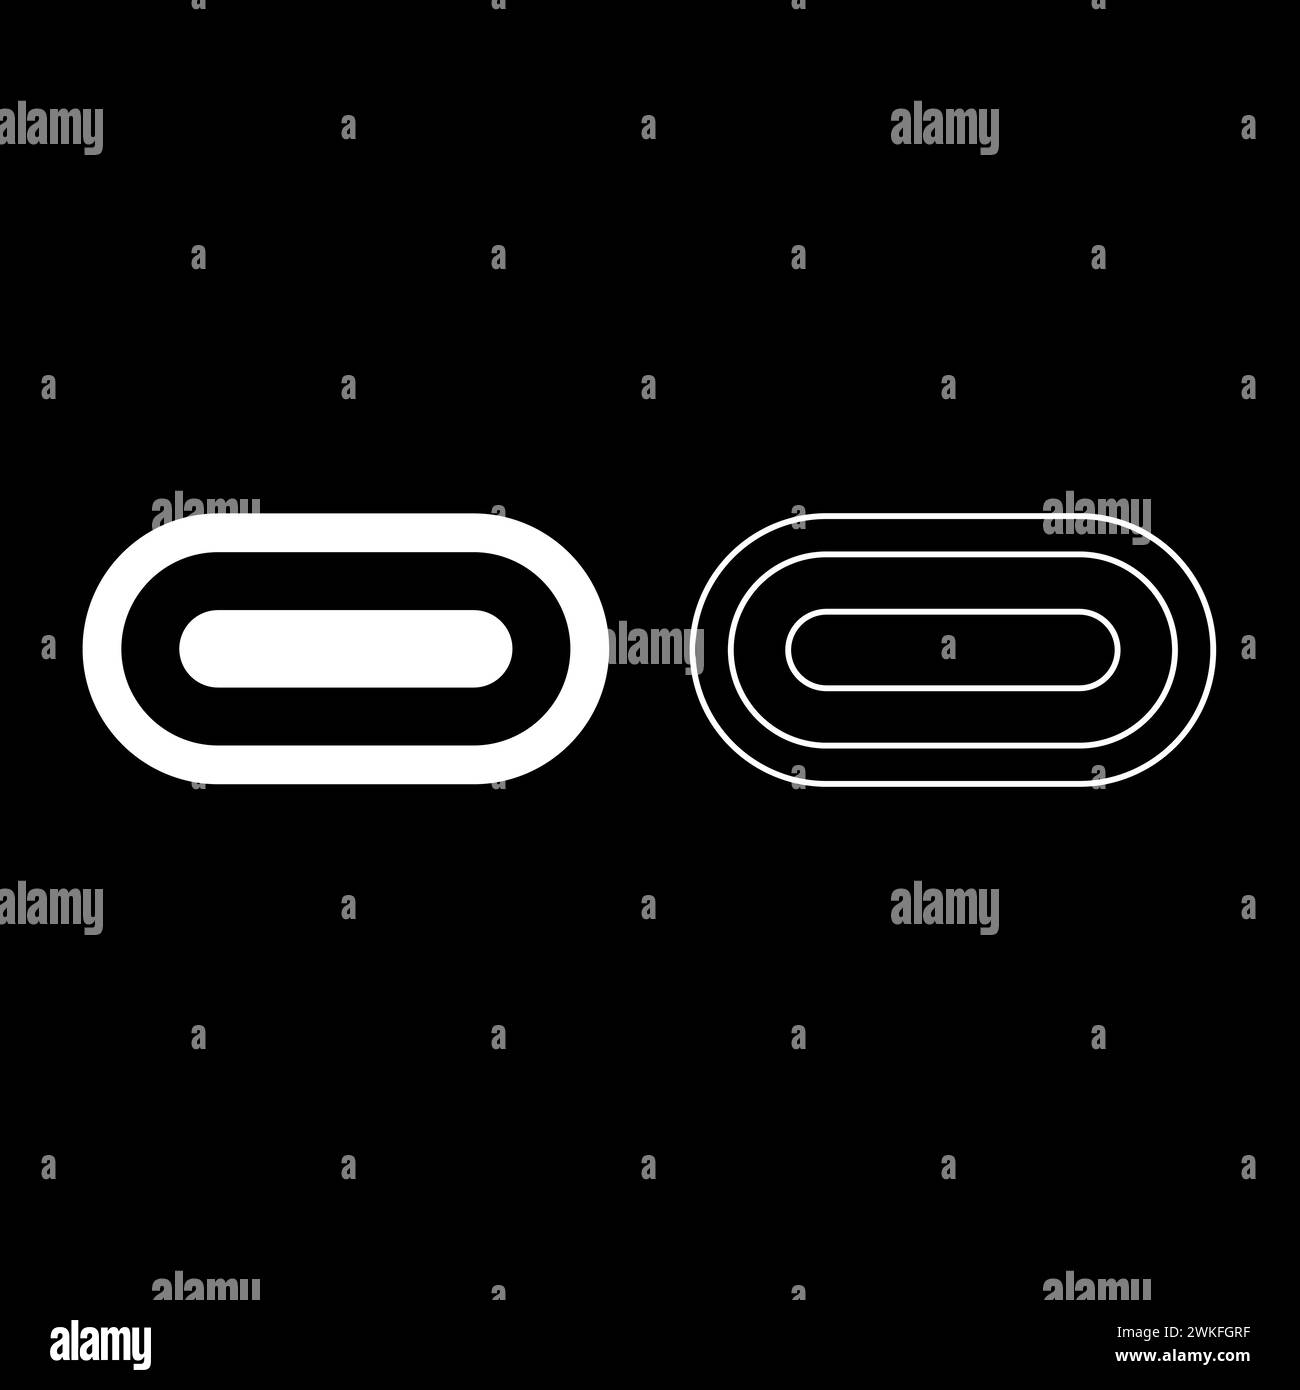 USB type C thunderbolt interface lightning port socket connector set icon white color vector illustration image simple solid fill outline contour Stock Vector